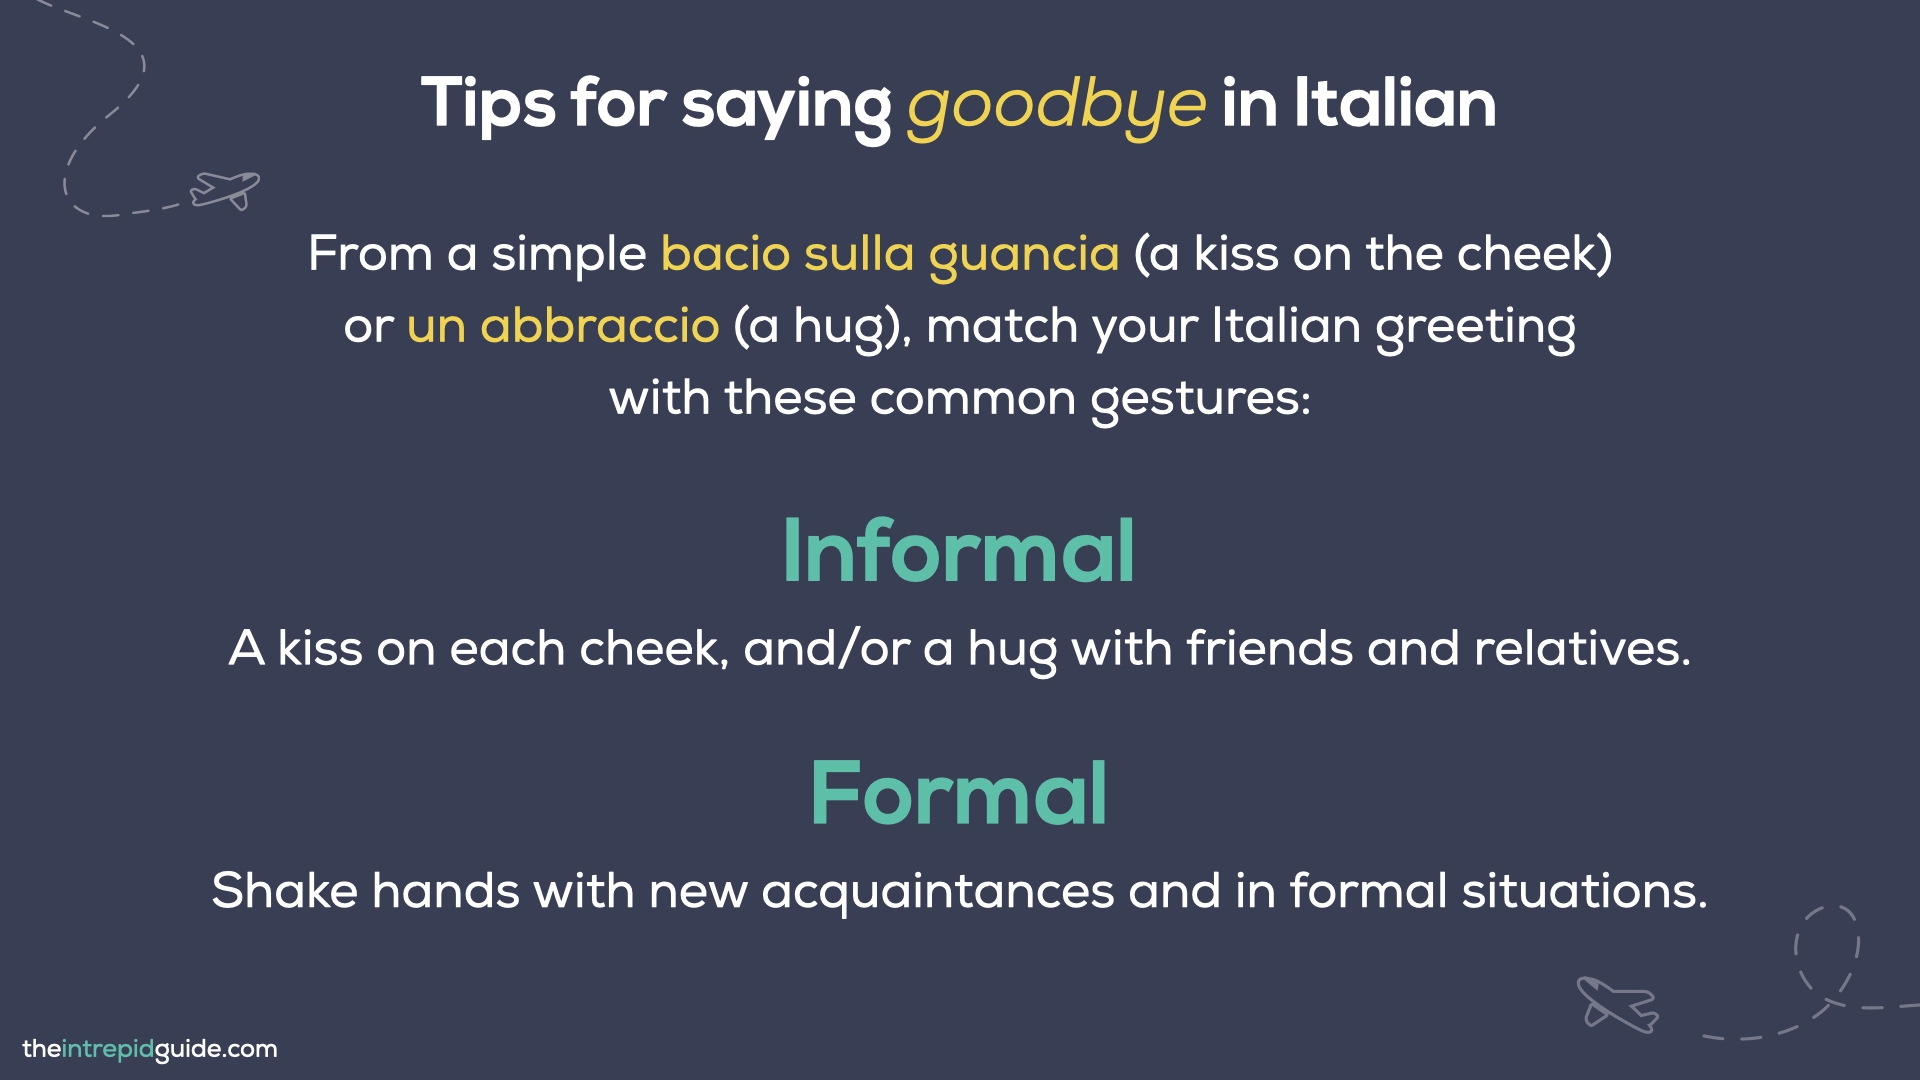 How to Say Goodbye in Italian - When to kiss on the cheek